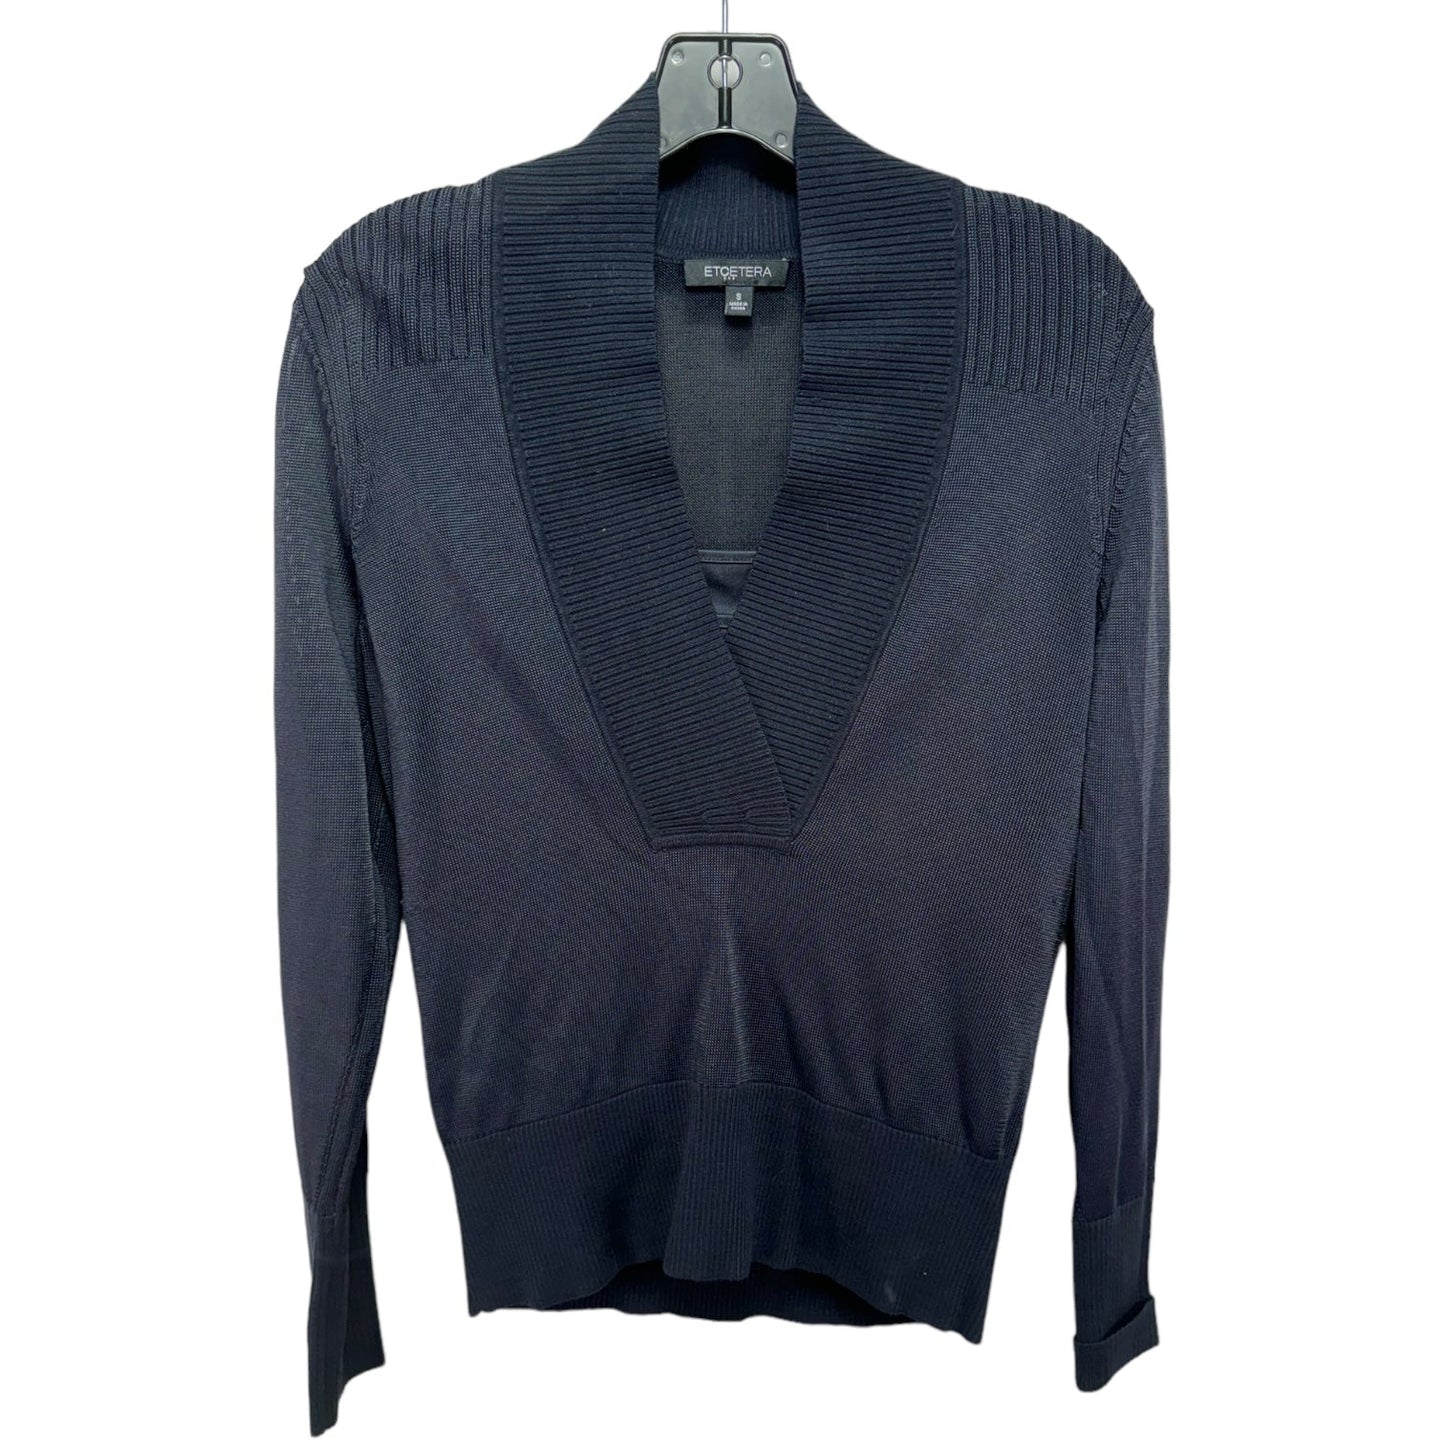 Navy Top Long Sleeve Etcetra, Size S